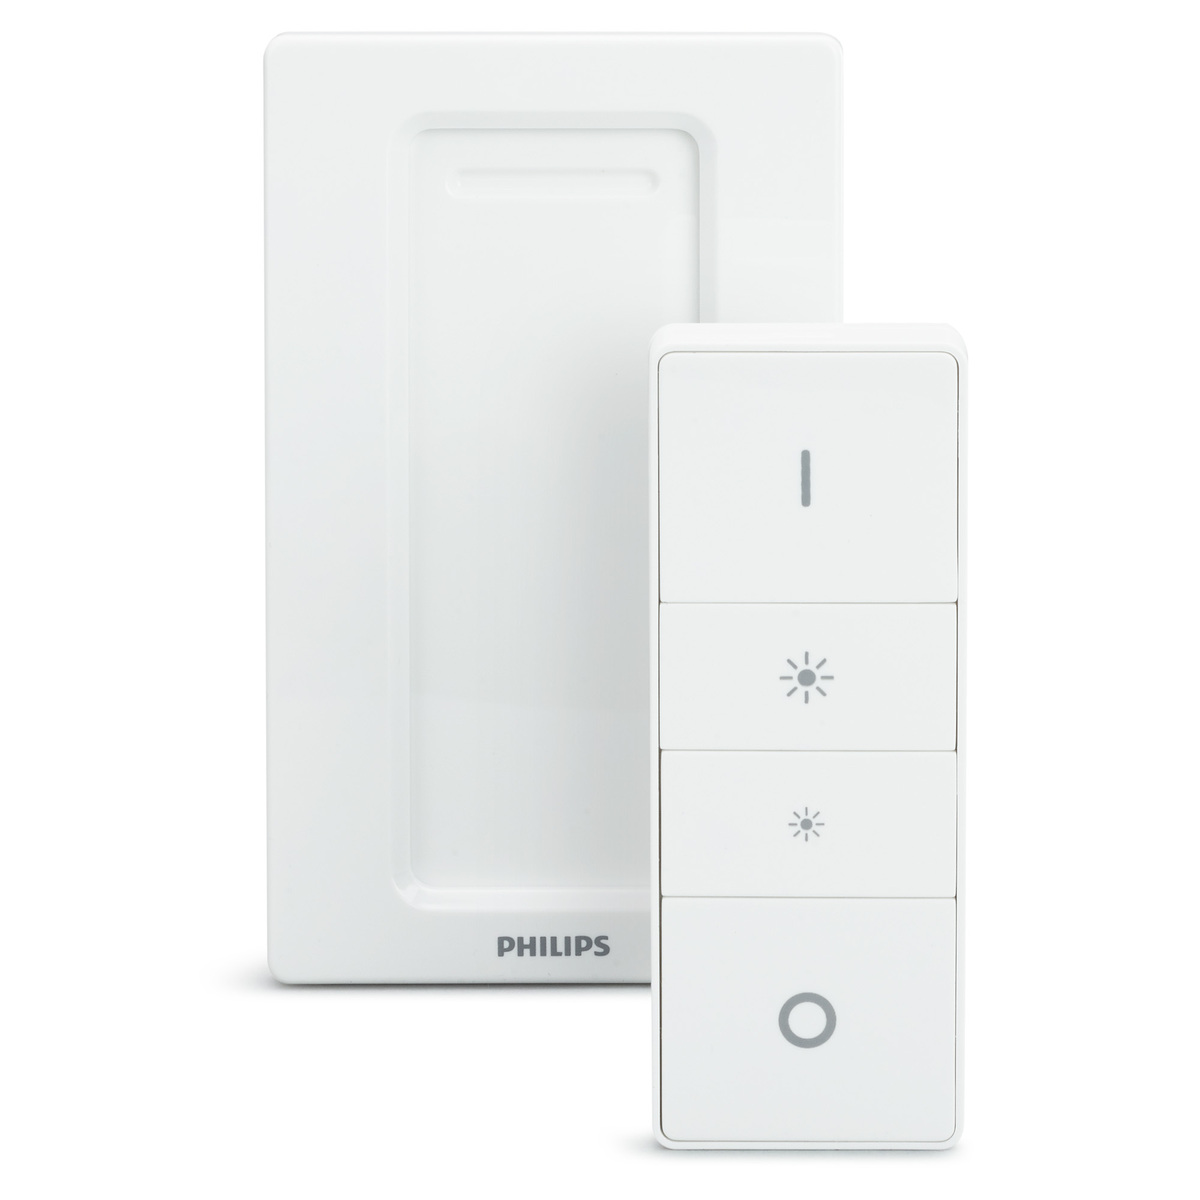 Philips Hue Smart Dimmer Switch, 929001173767